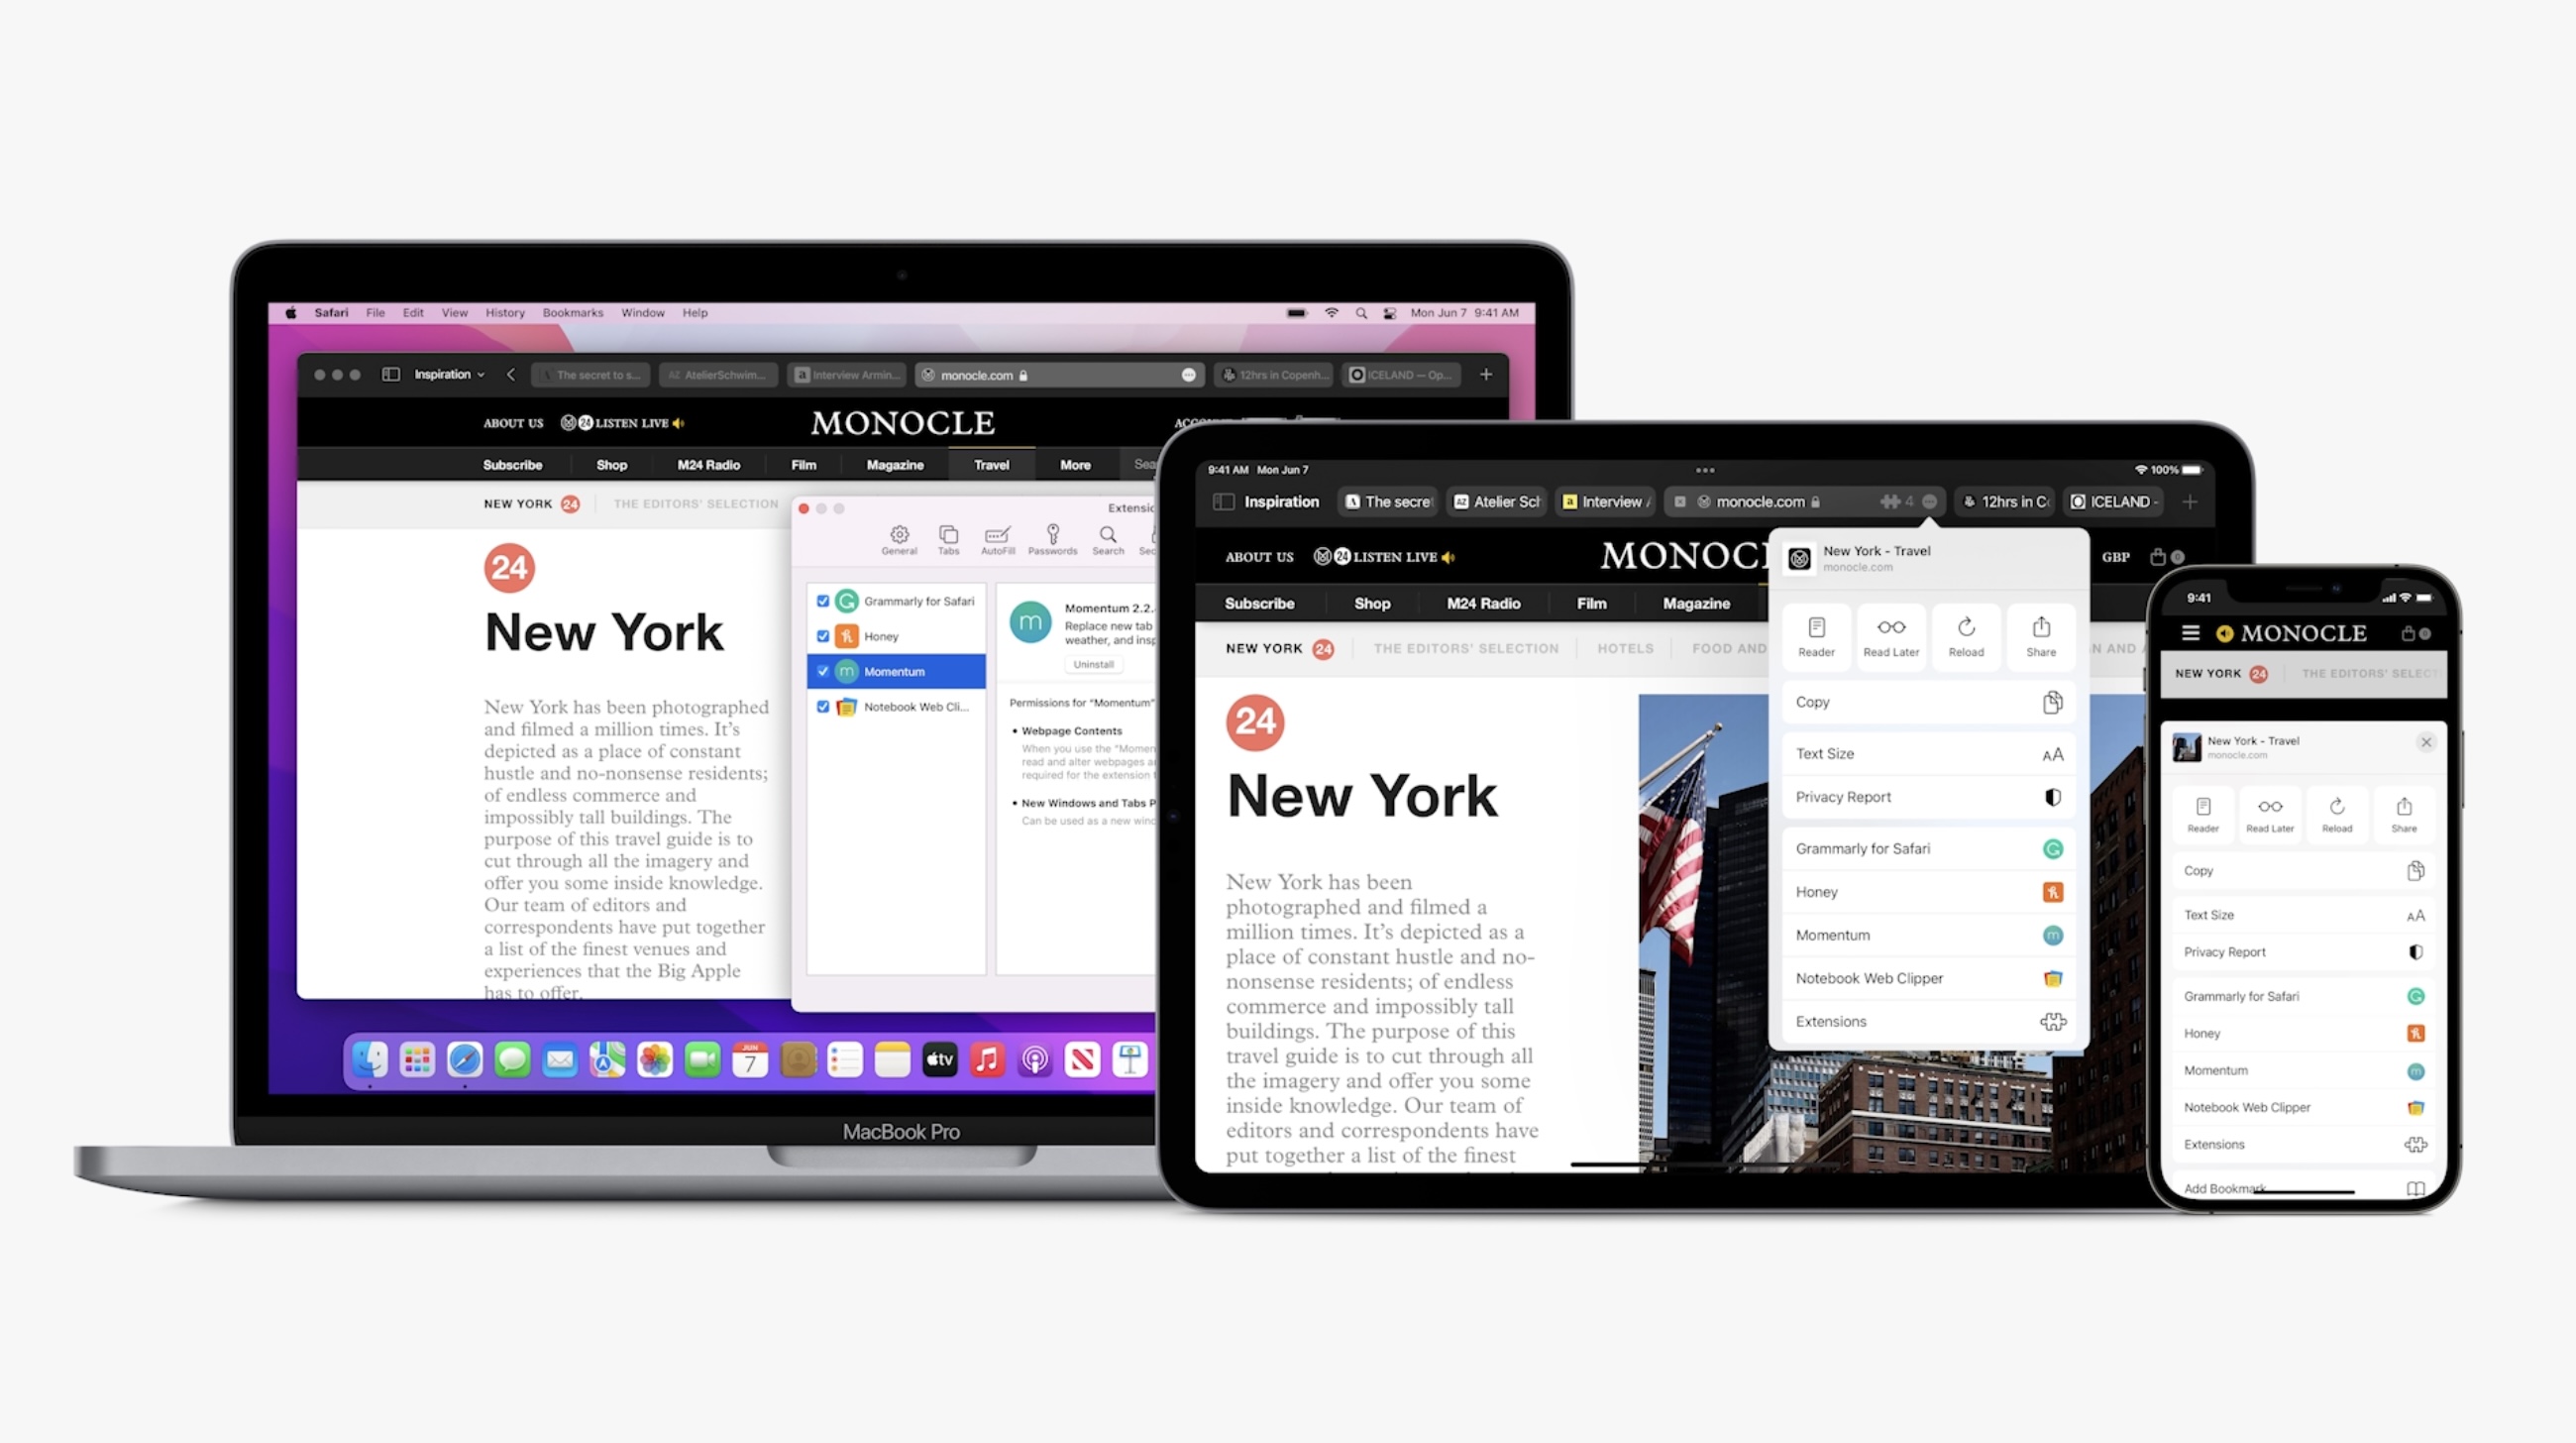 How to Build a Safari App Extension in iOS 15